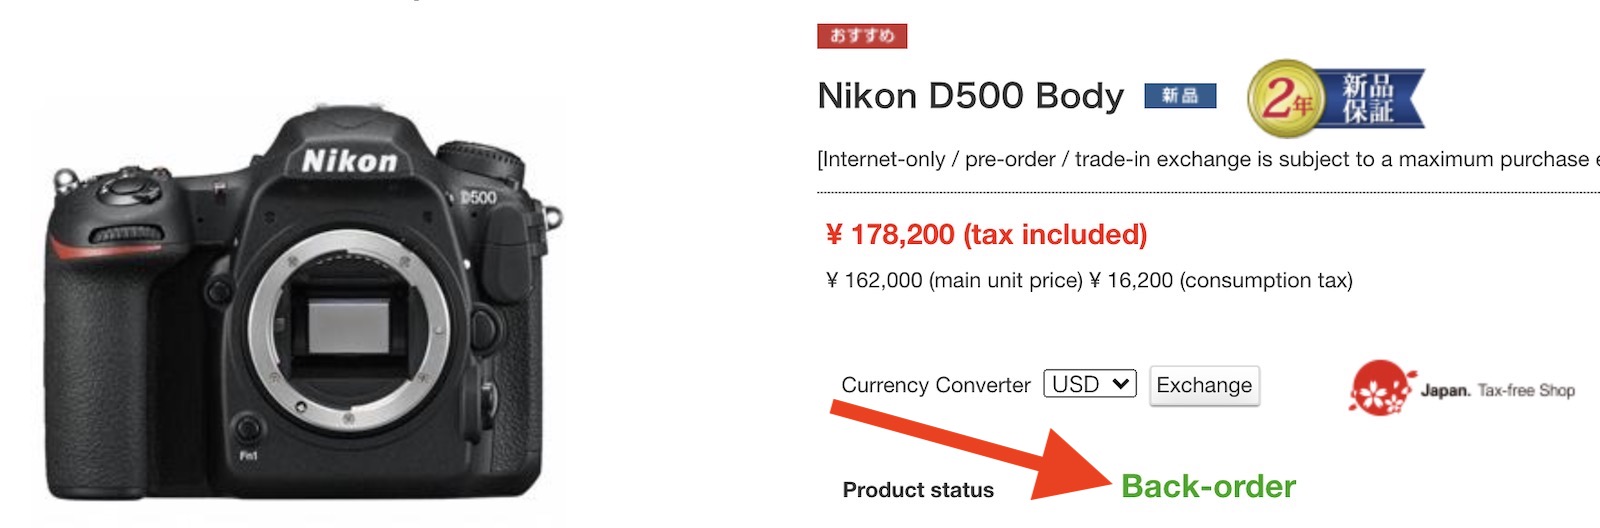 Nikon D500 camera listed as discontinued or out of stock at major 